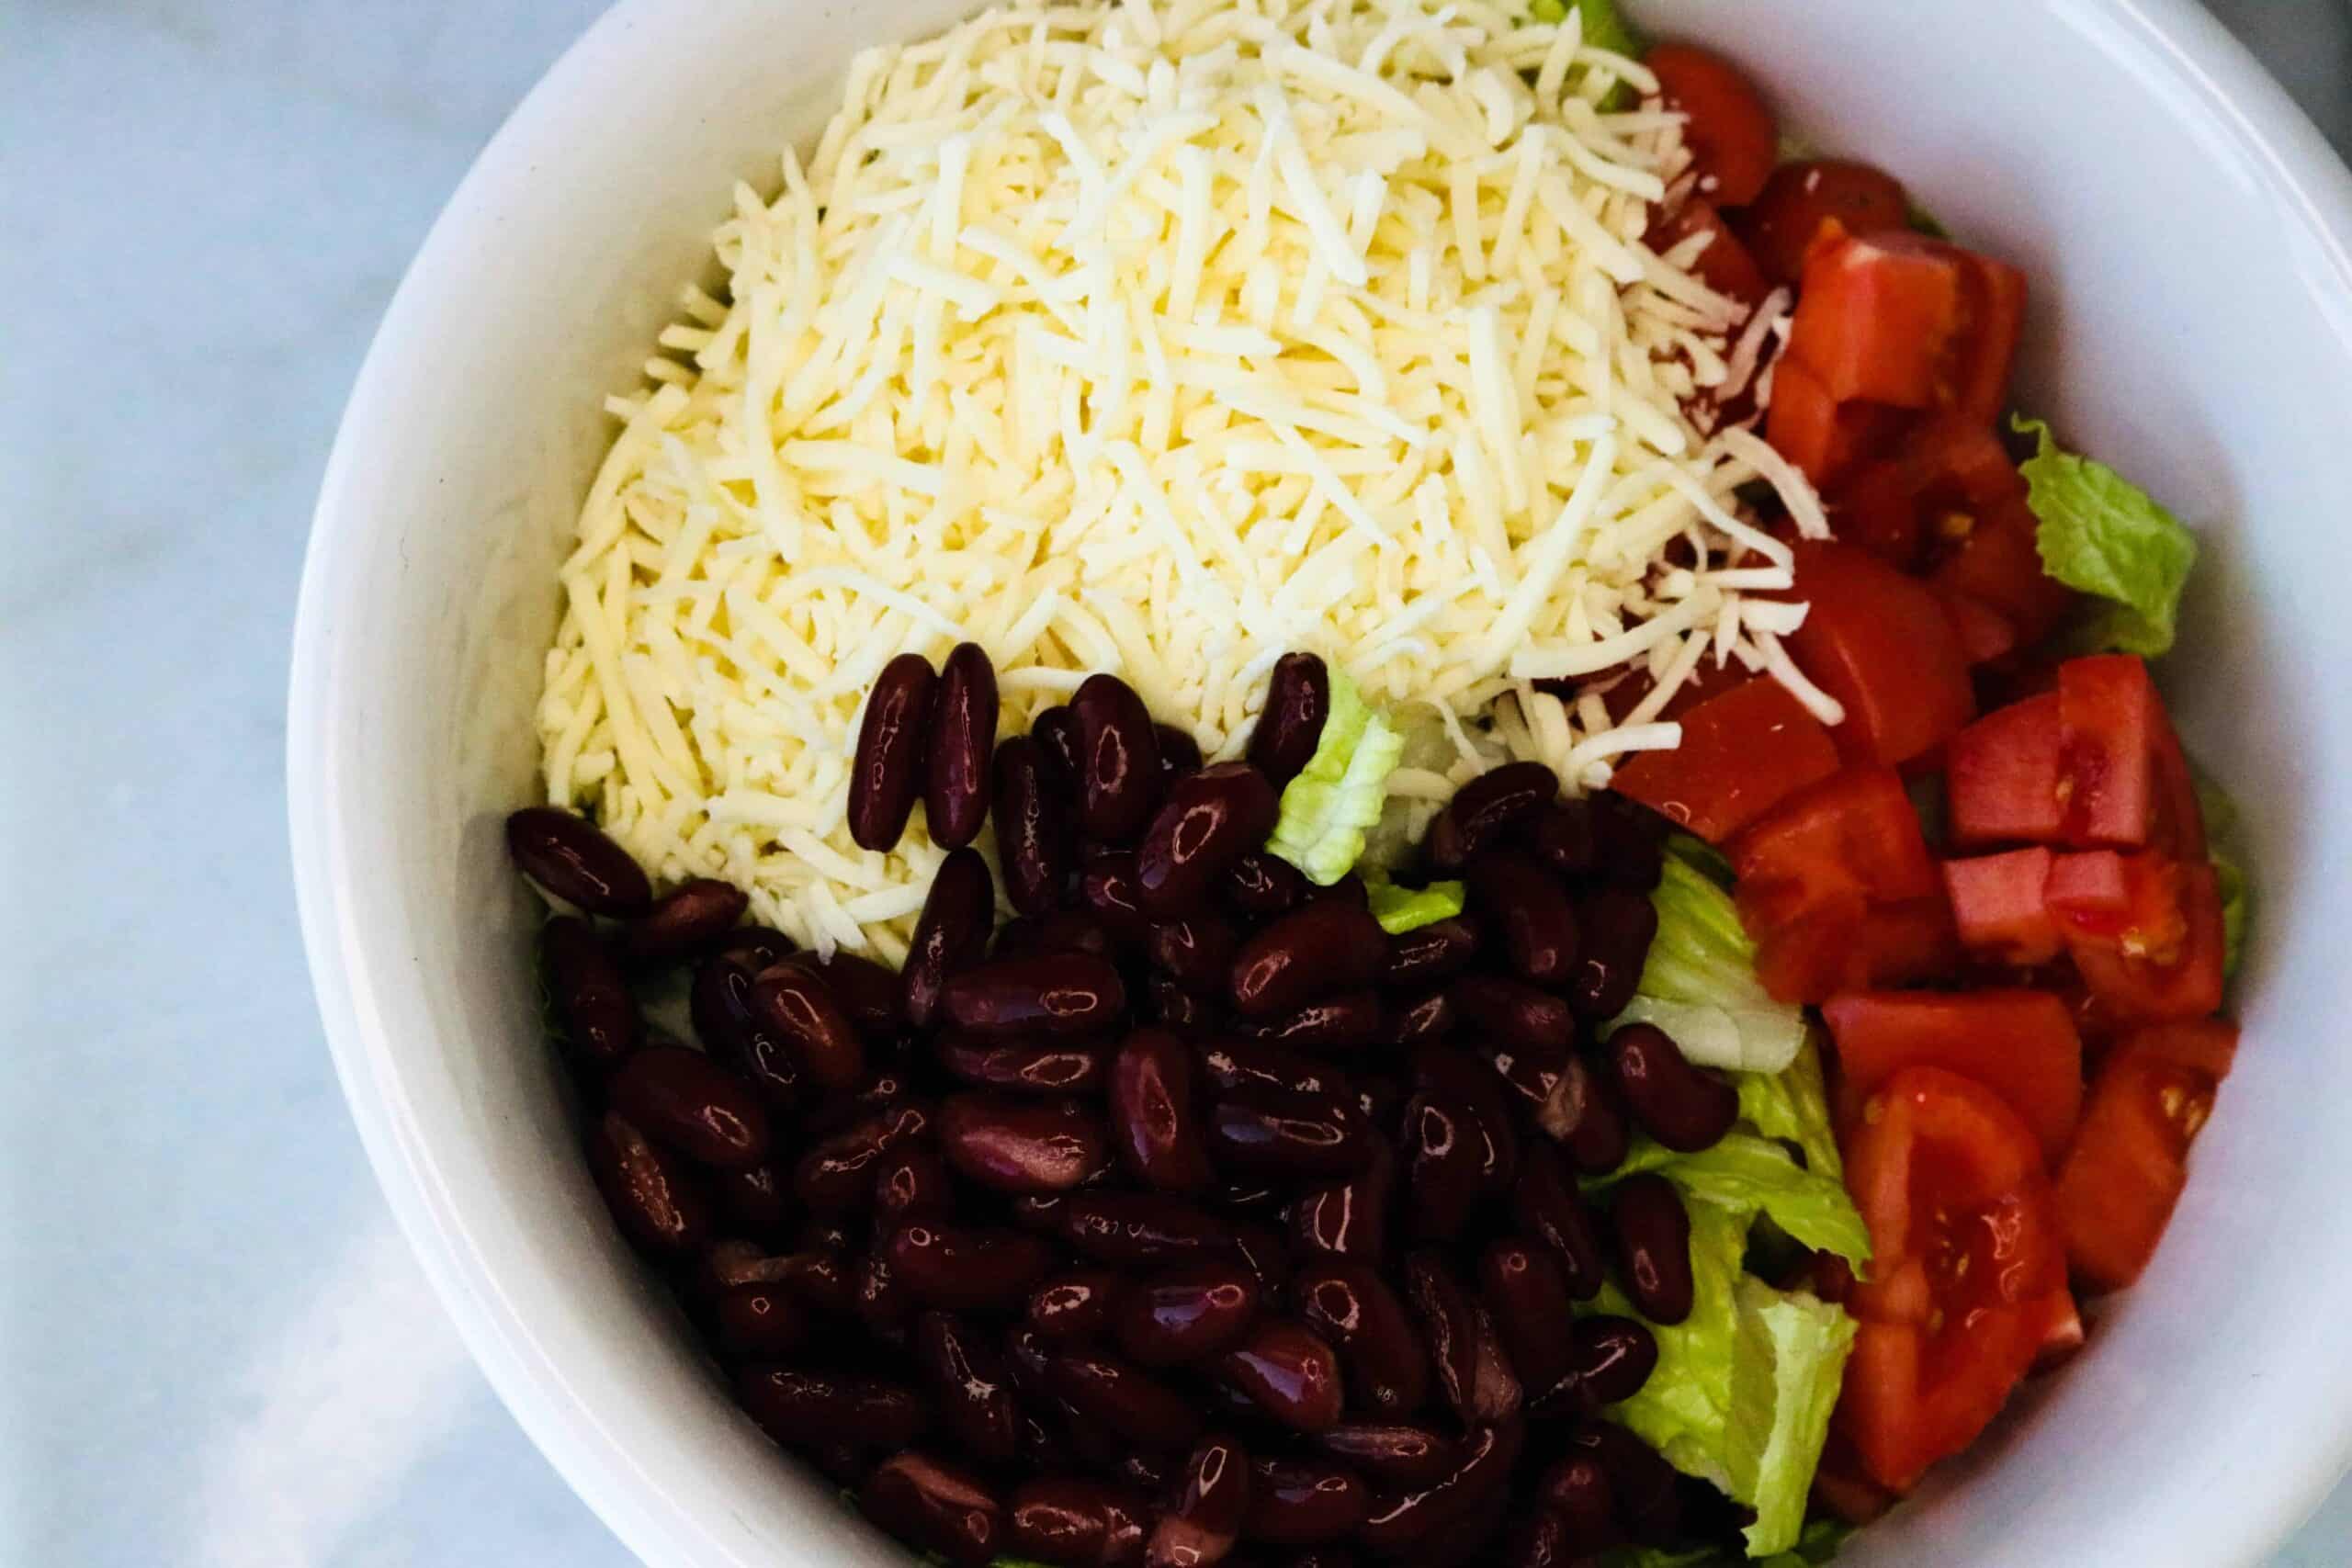 Monterrey Jack cheese, sliced tomatoes, kidney beans and lettuce in a white bowl